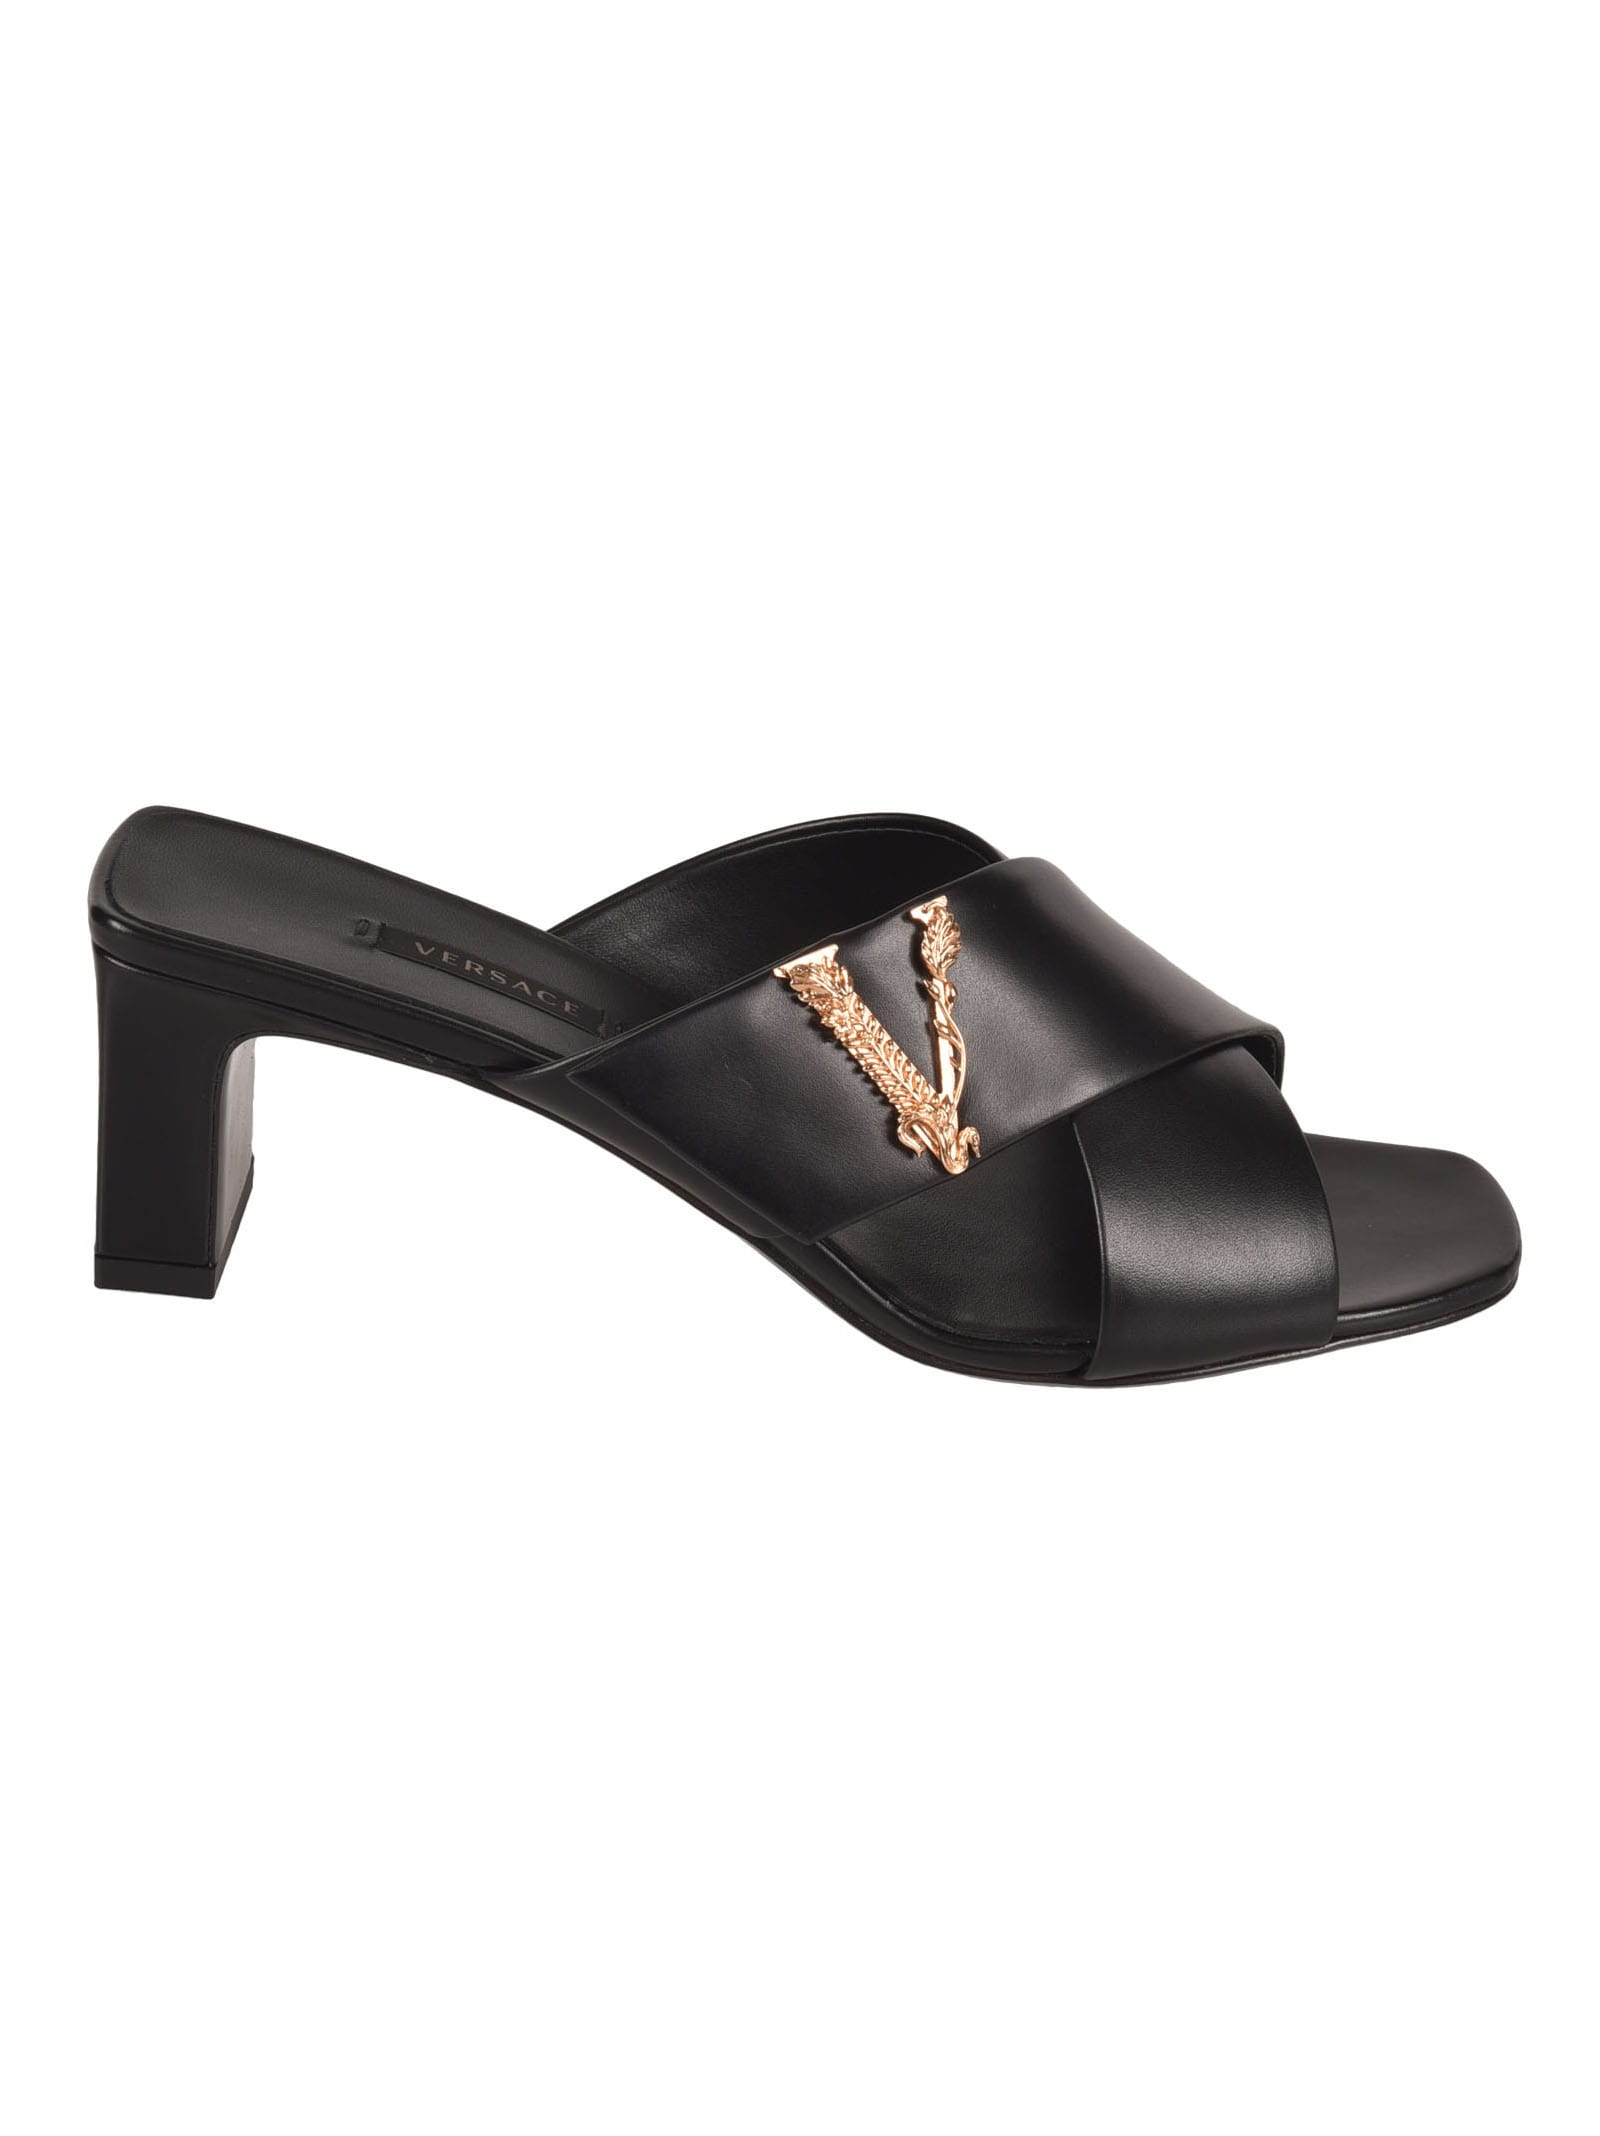 Buy Versace Cross Strap Logo Plaque Sandals online, shop Versace shoes with free shipping